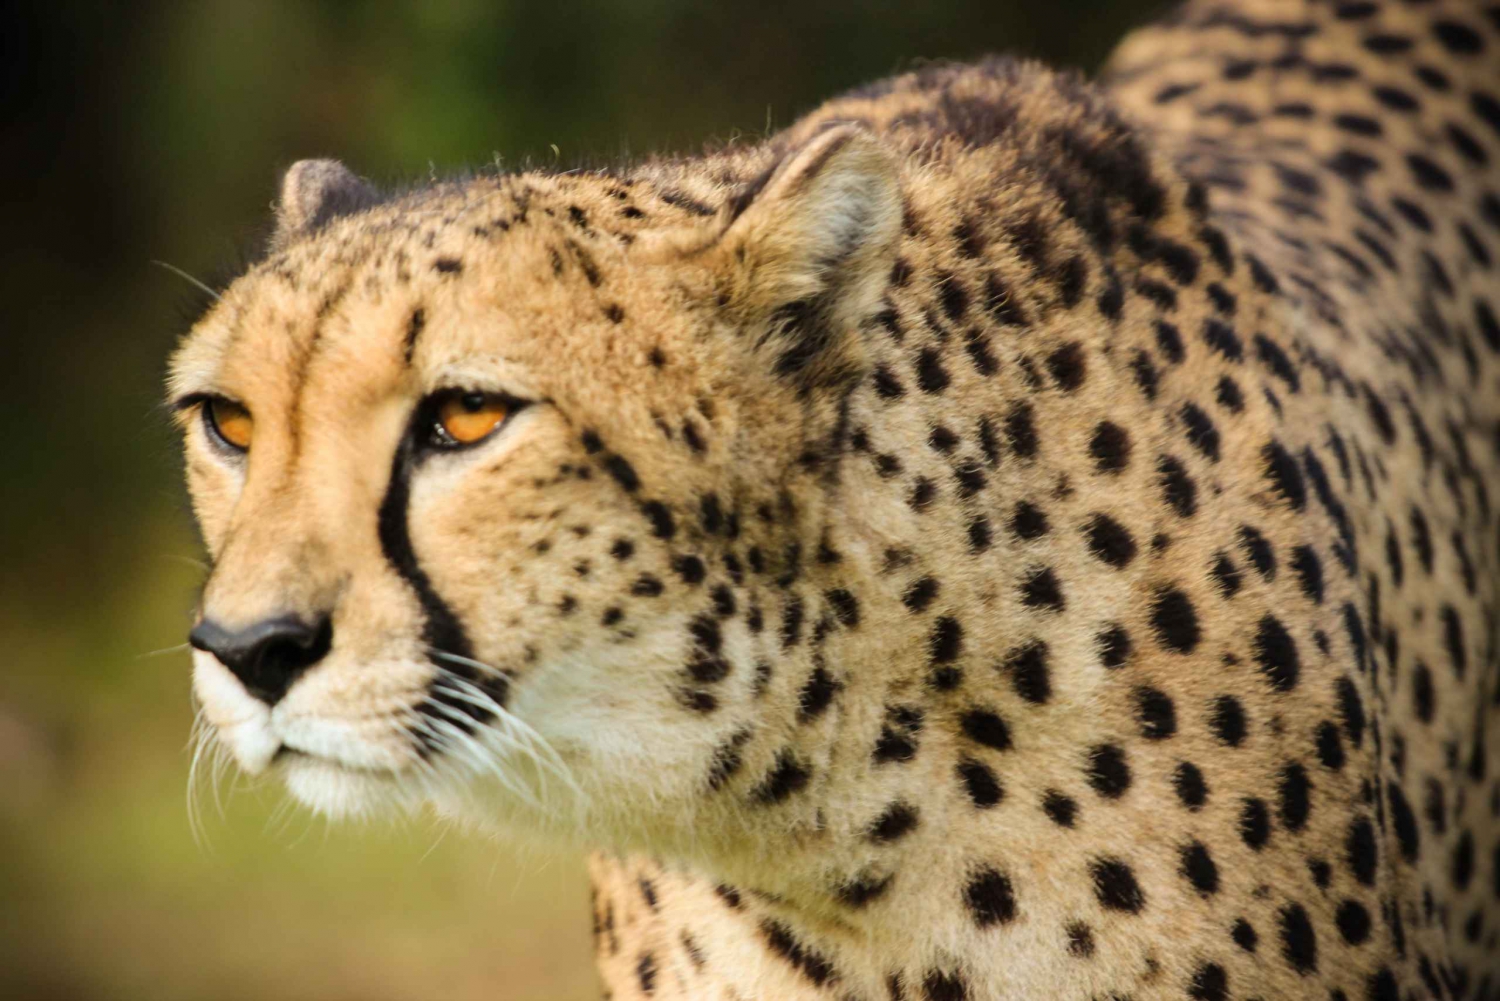 Plettenberg Bay: Cats in Conservation Full Day Tour